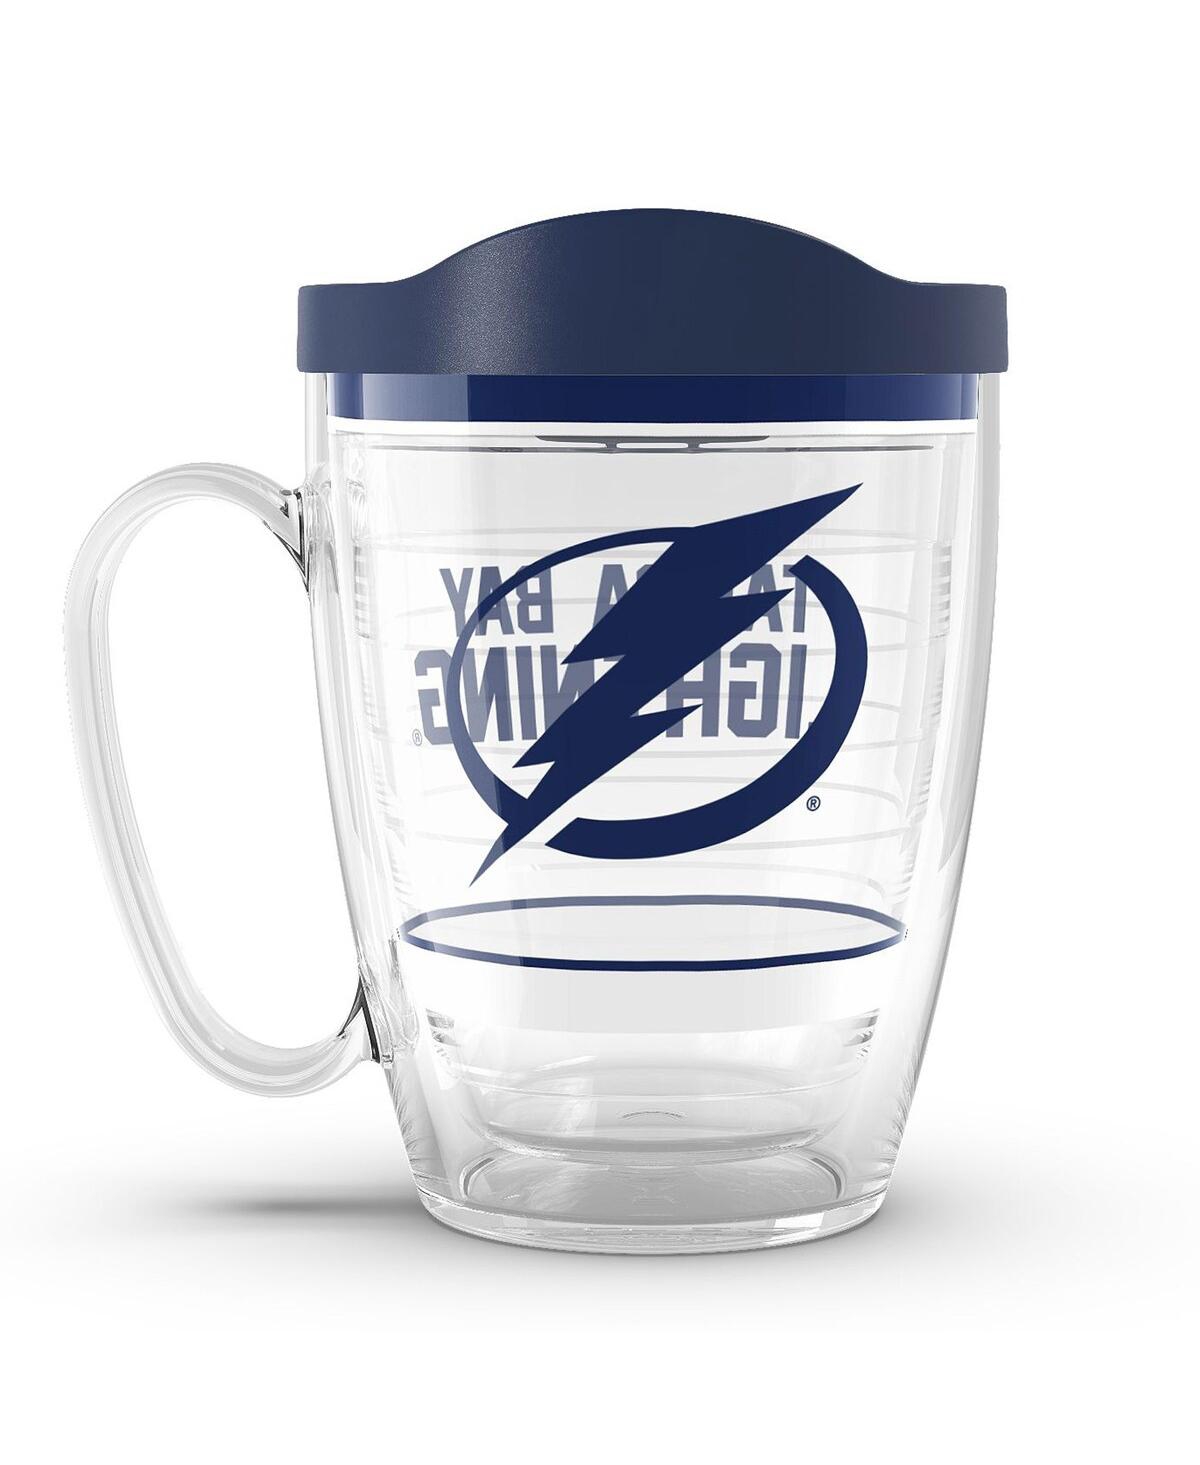 Tervis Tumbler Tampa Bay Lightning 16 oz Tradition Classic Mug In Blue,white